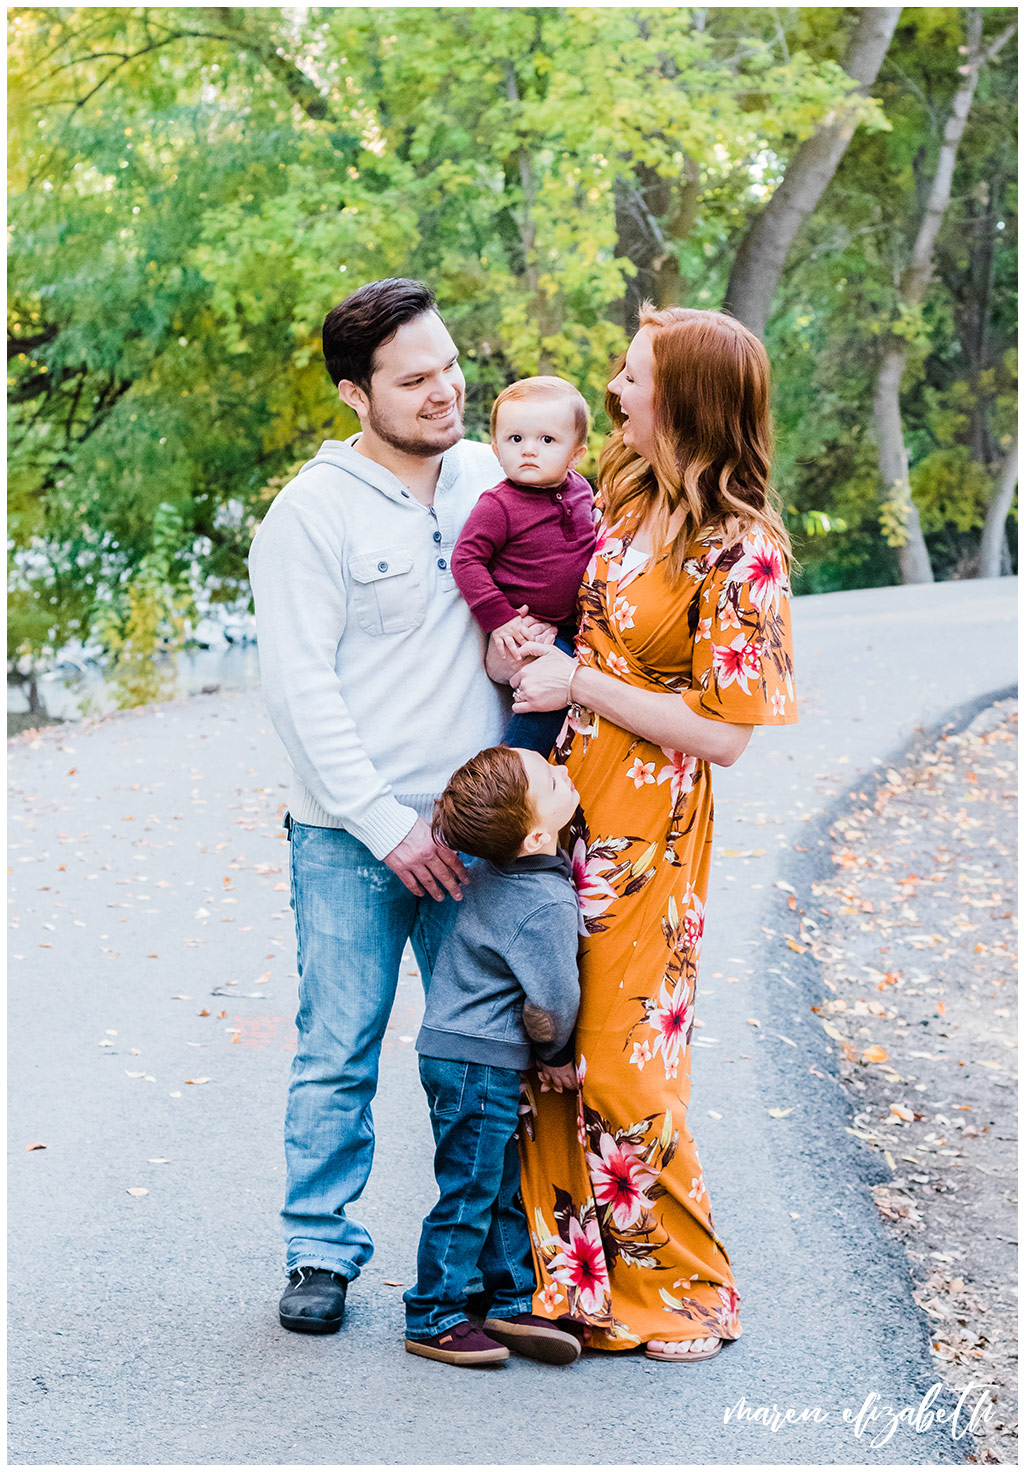 Utah Fall Mini Sessions 2018 | Did you know October is the busiest month for family pictures in utah? It's because everyone wants the fall colors in our canyons. Make sure you plan ahead to schedule your family picture session timed perfectly with the best fall colors. | Maren Elizabeth Photography | Utah Photographer